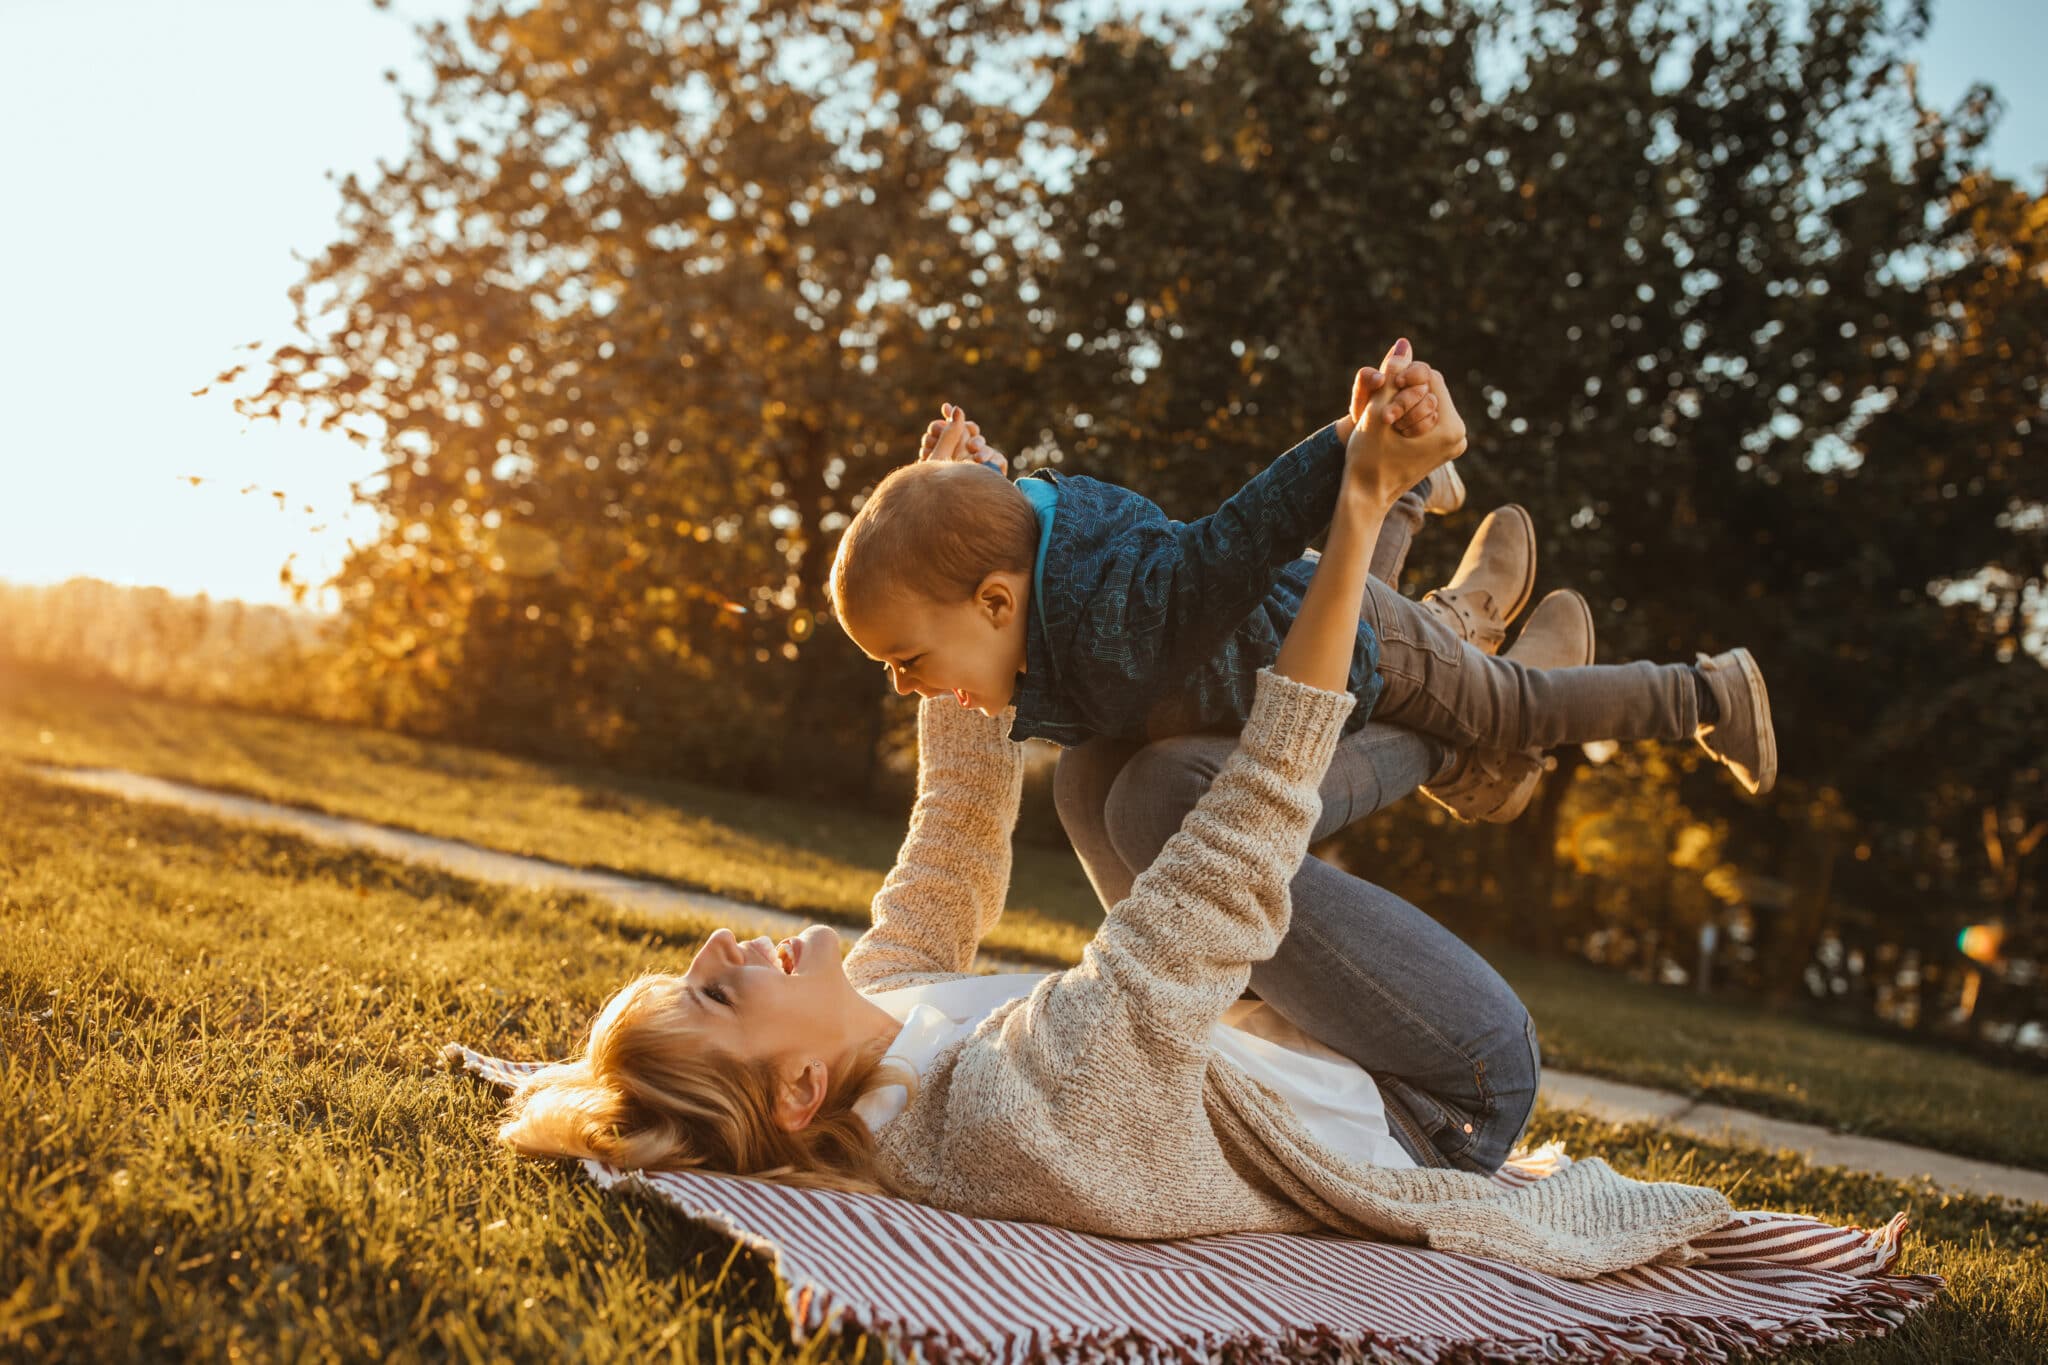 Mom and son have lovely moments together outdoors